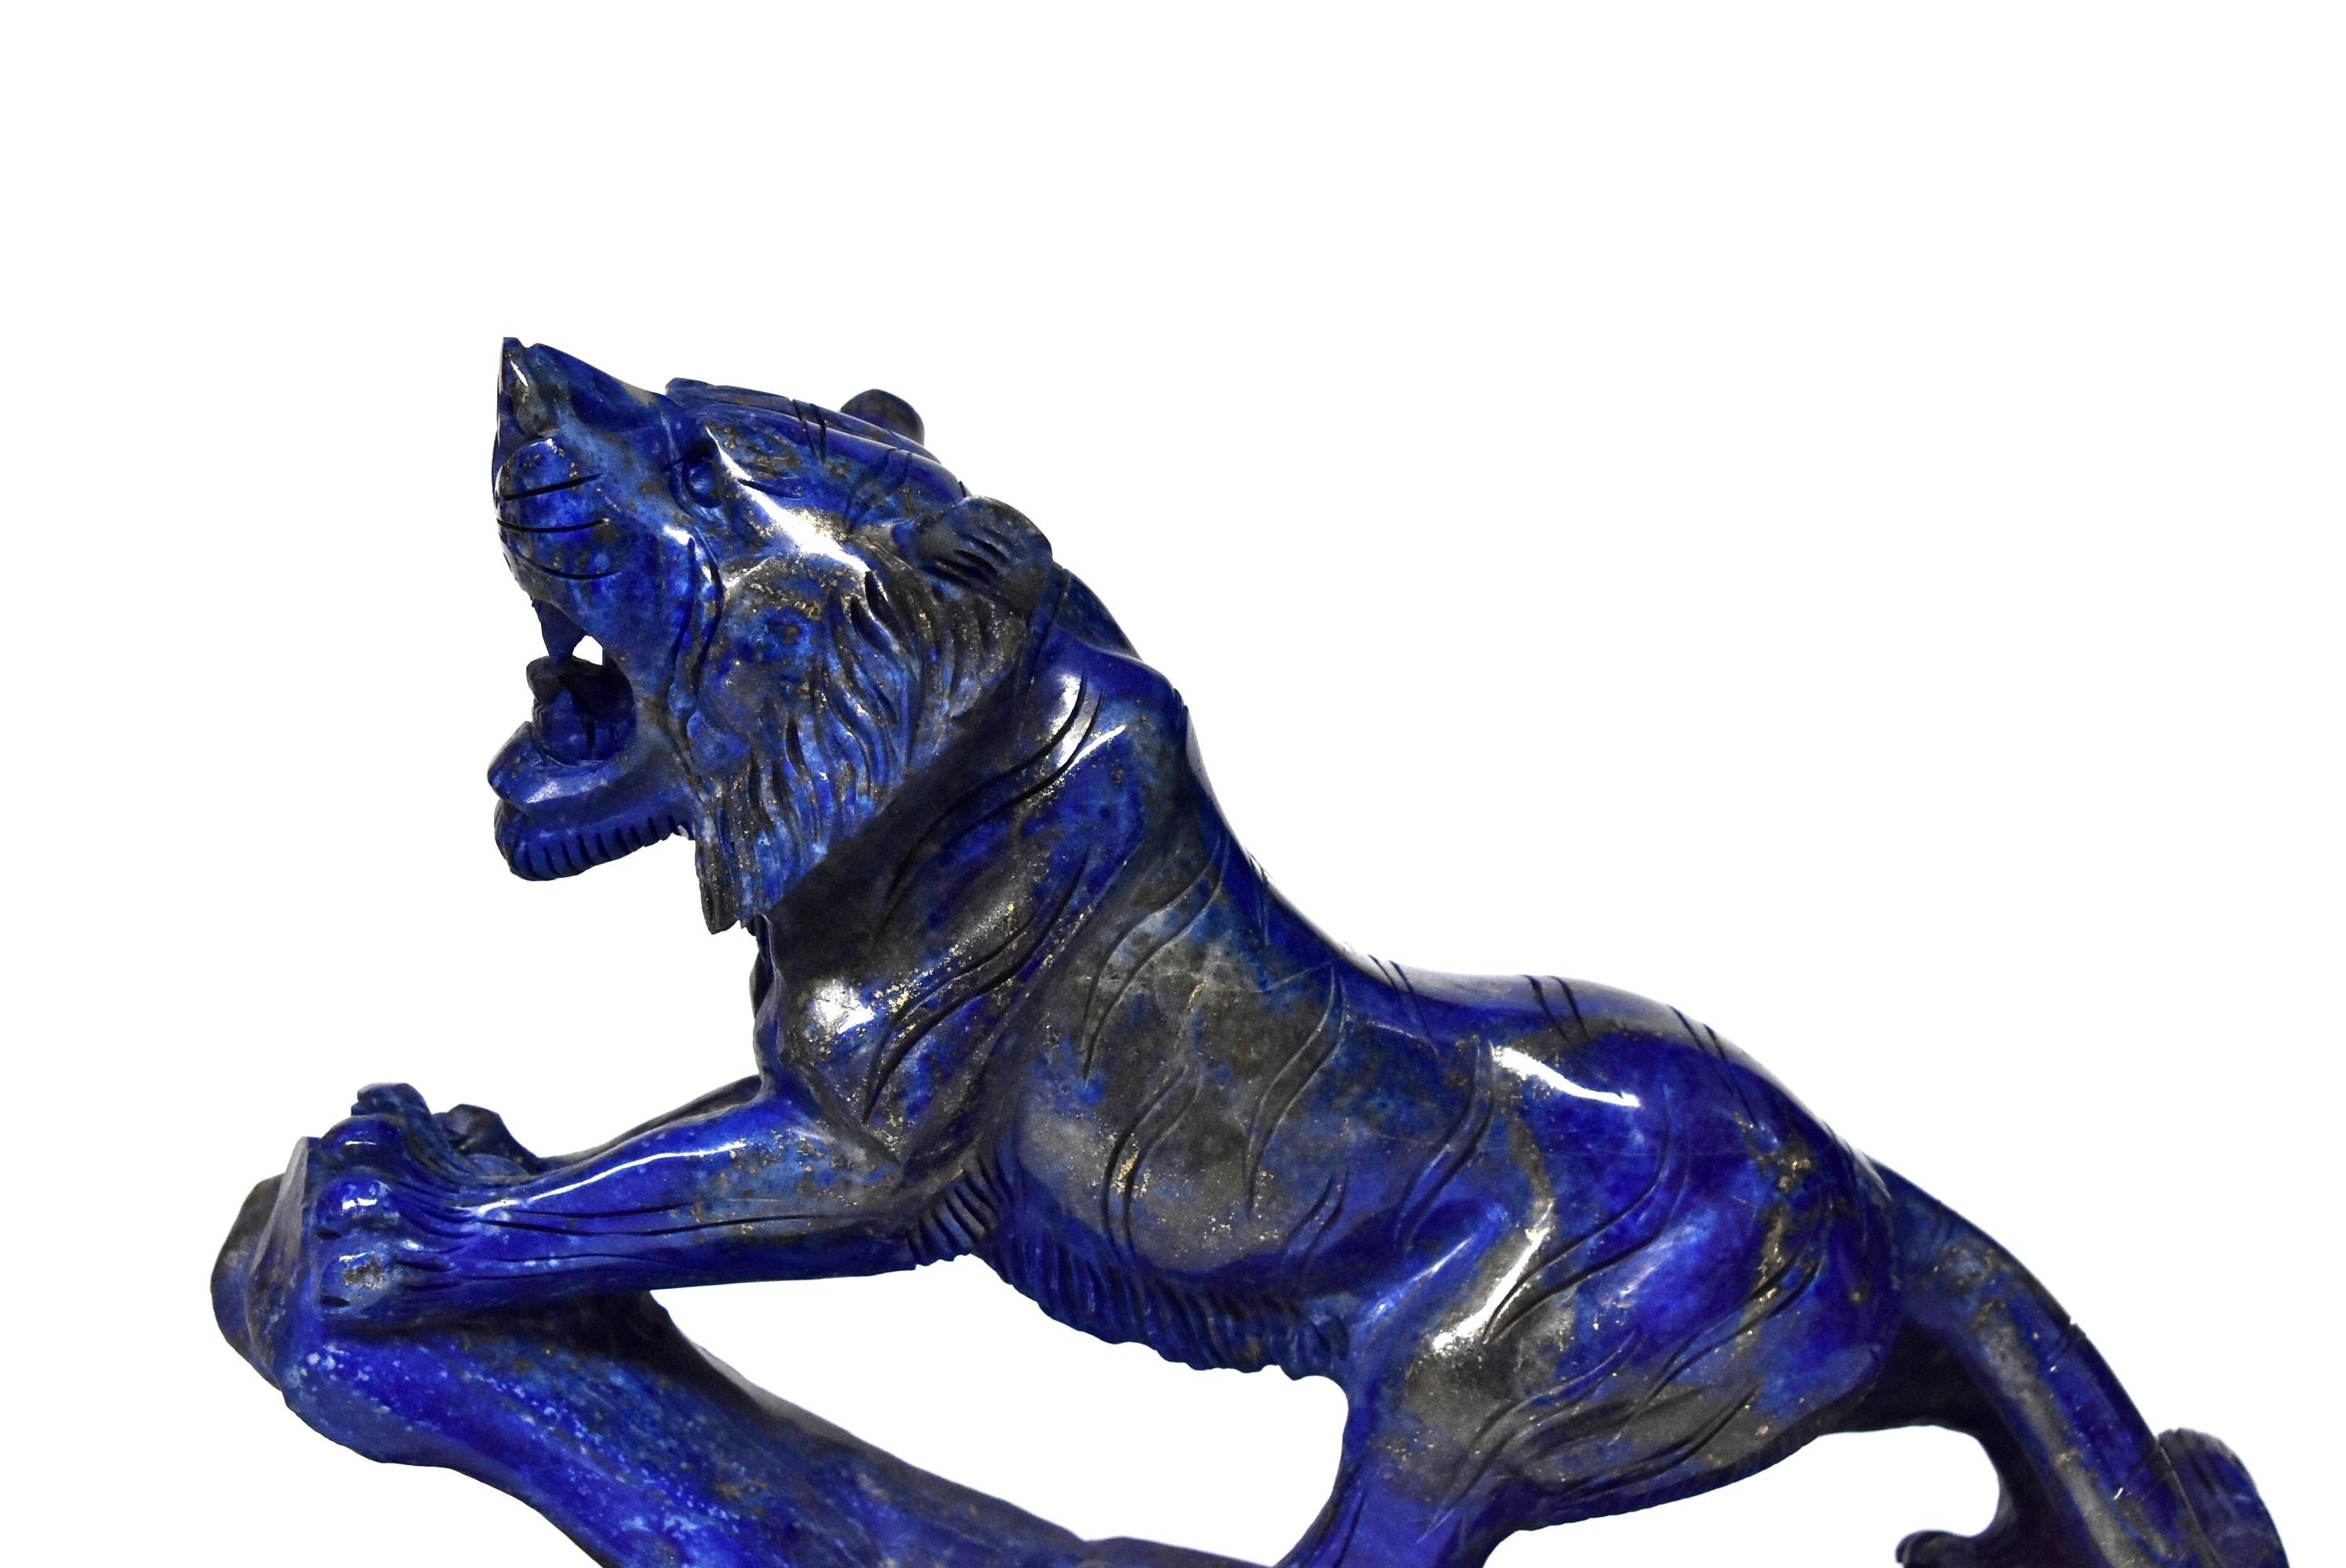 A beautiful all natural lapis lazuli tiger sculpture. The 2.5 lb violet blue stone has stunning glittering of gold, a contrast that creates a mesmerizing visual effect. Fantastic carving work renders realistic muscles and paws. This particular stone